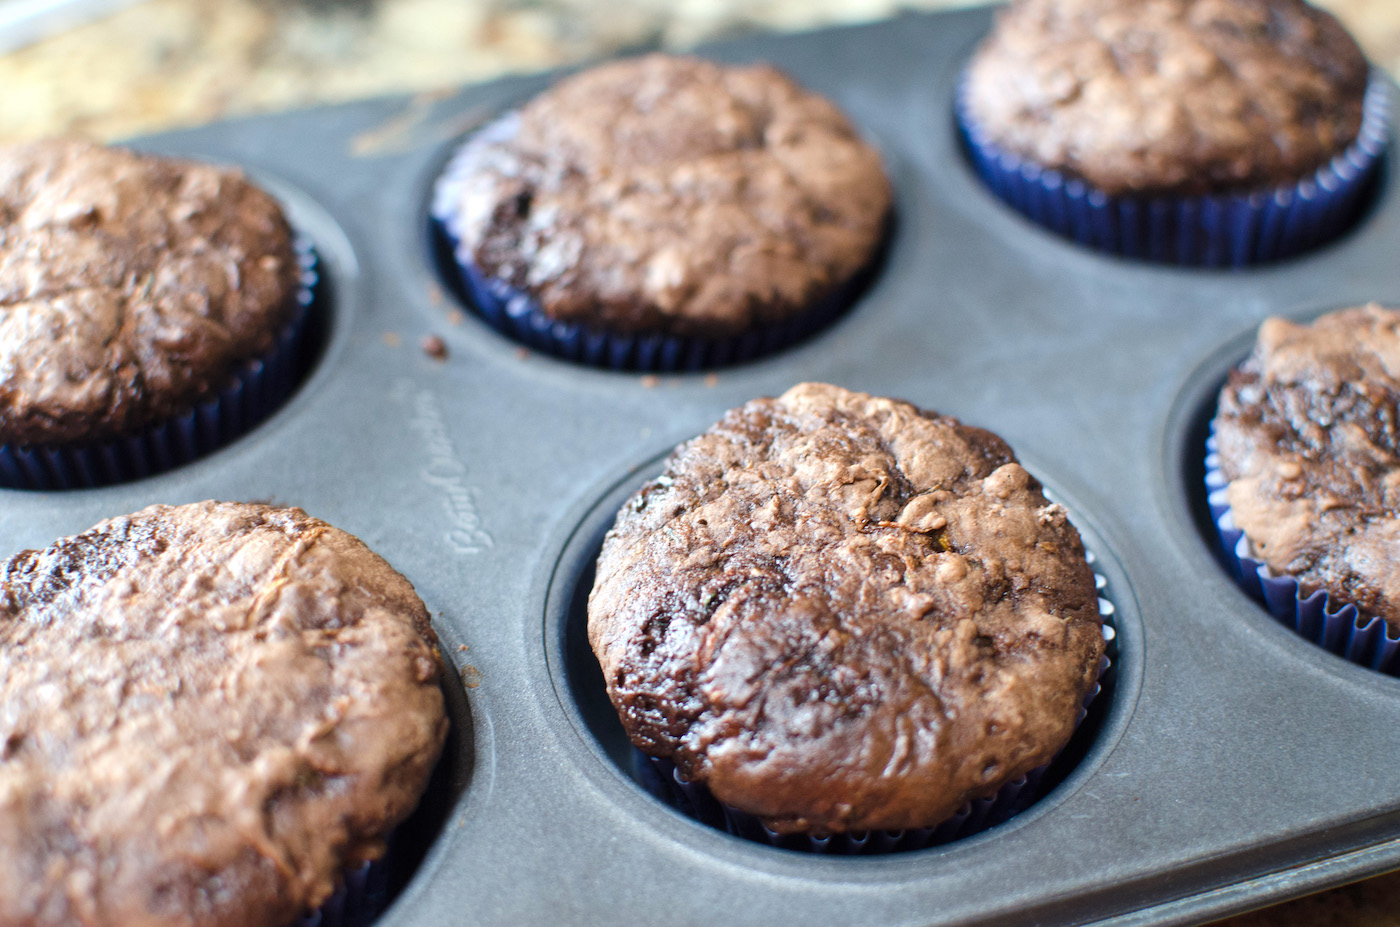 Chocolate zucchini cupcakes baked in a metal tin